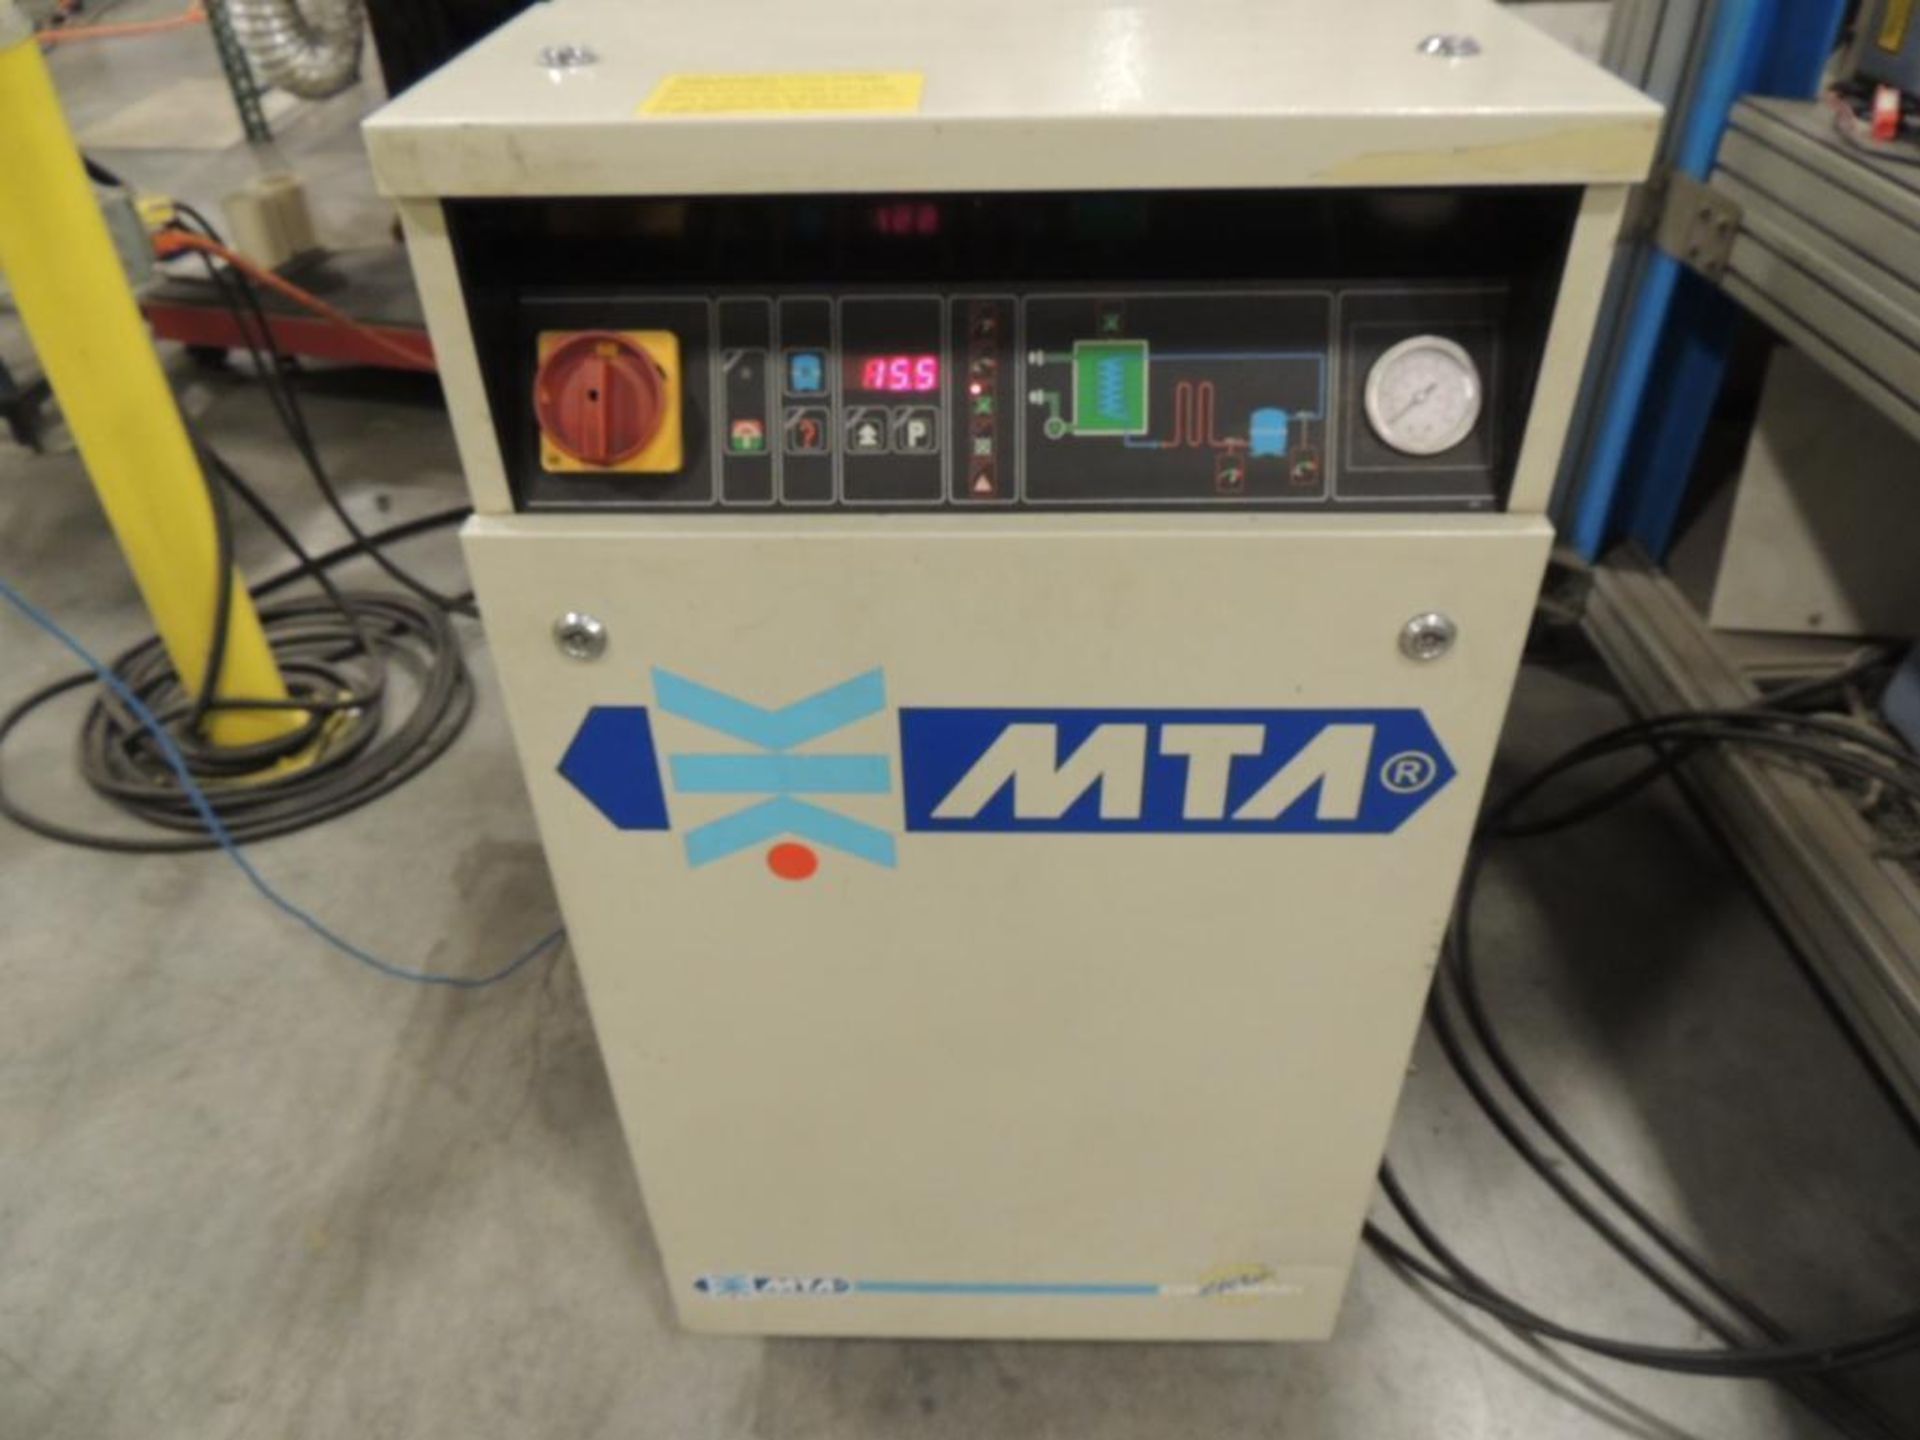 Giotto Denim Laser Etching Station & Rotary Table, with MTA Model TAE 020 Chiller - Image 2 of 4